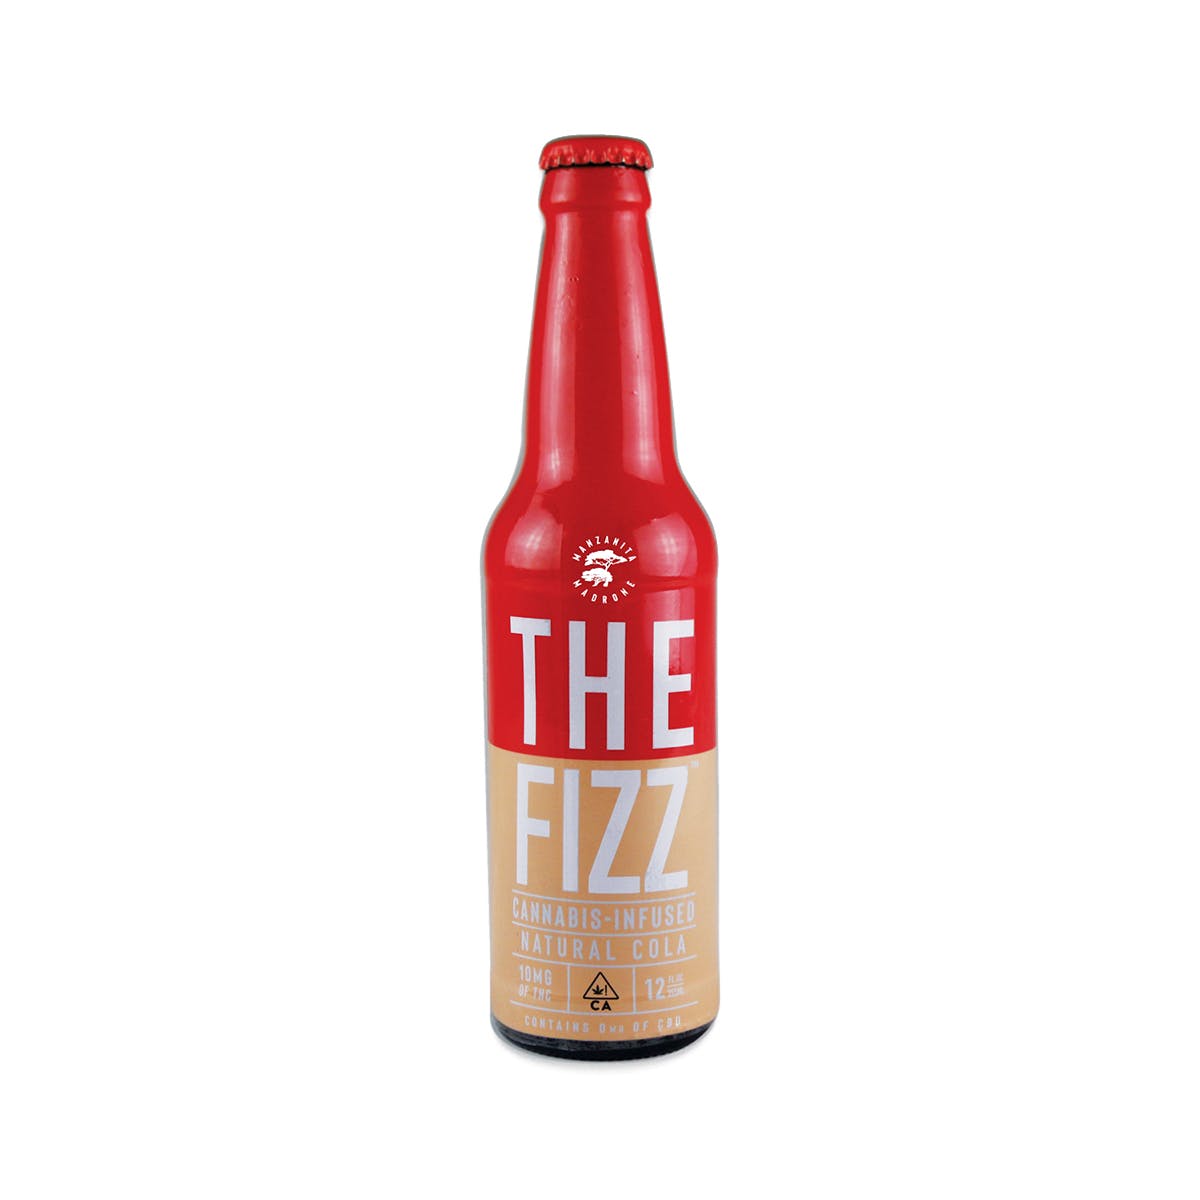 marijuana-dispensaries-the-peoples-remedy-patterson-in-patterson-the-fizz-natural-cola-10mg-thc